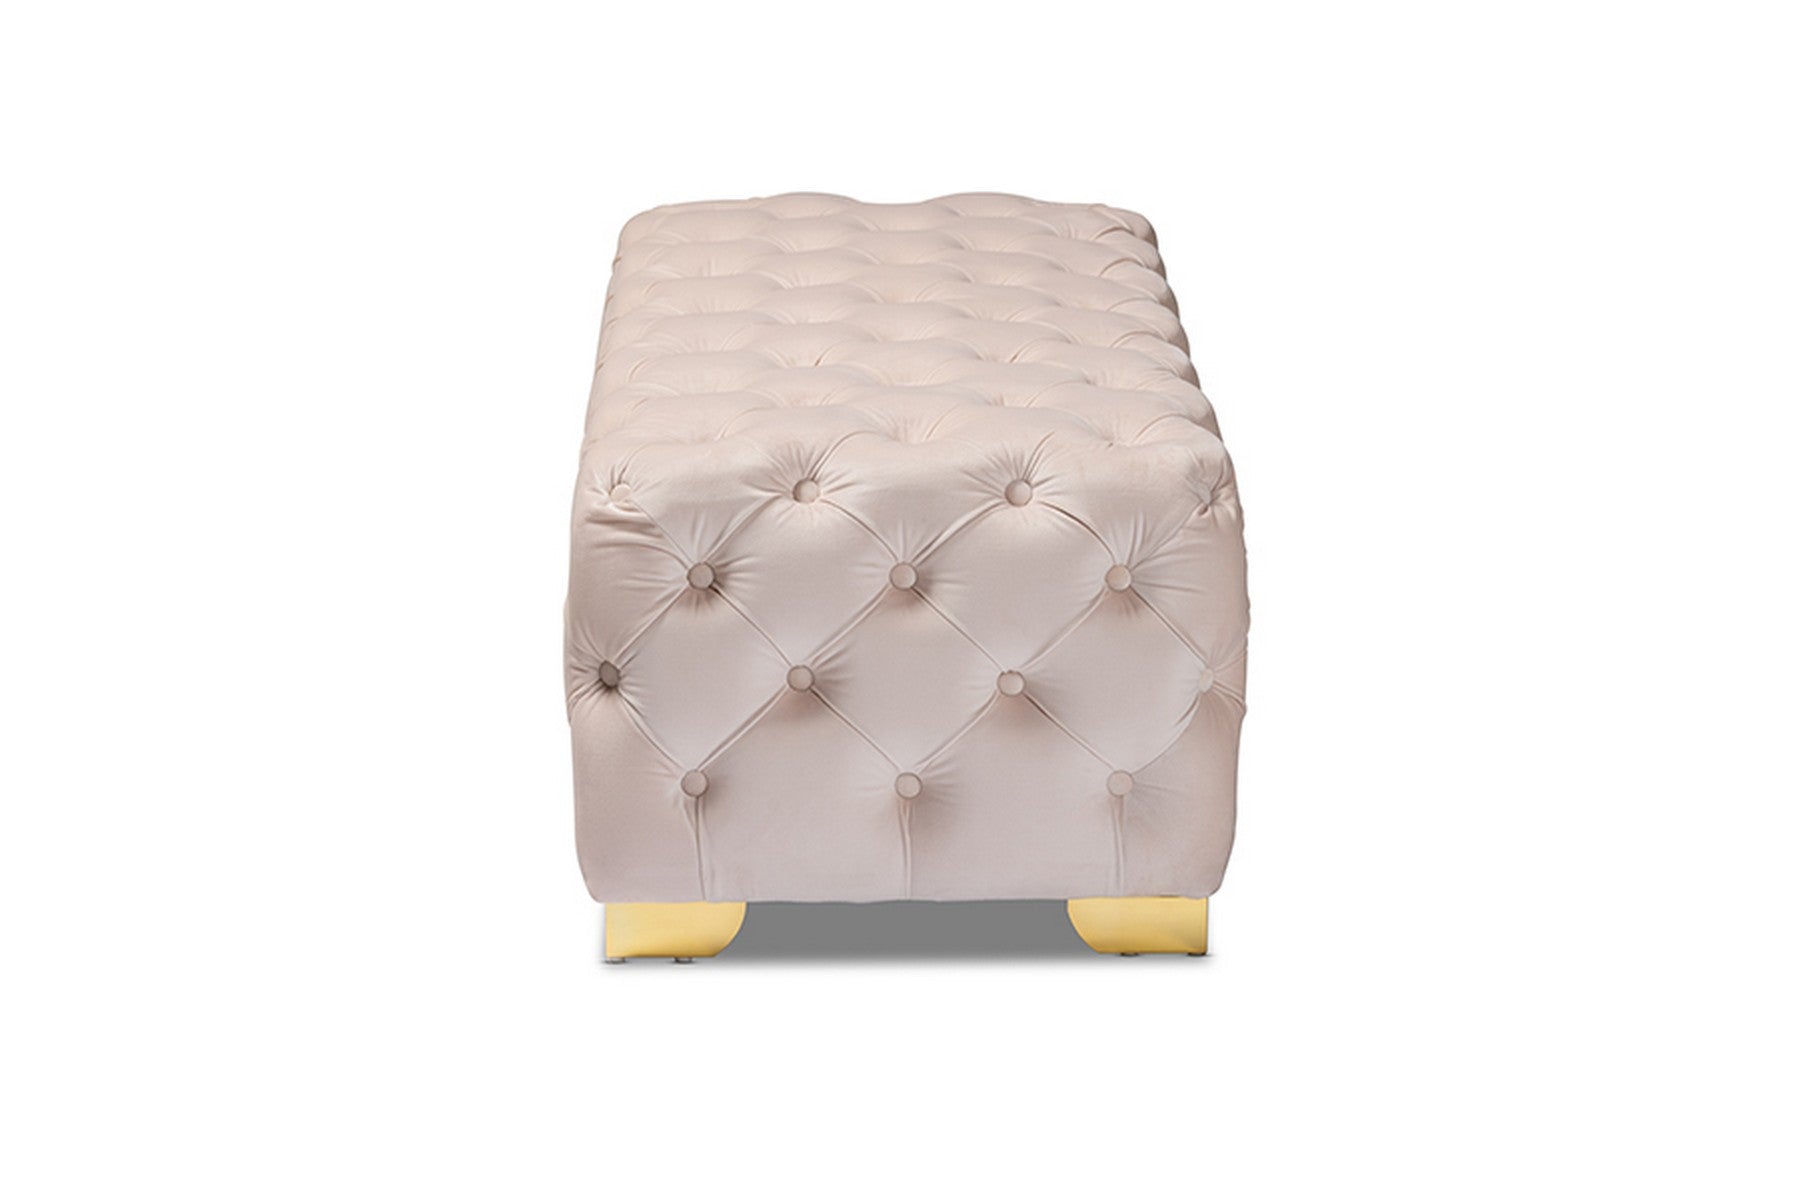 Baxton Studio Avara Glam and Luxe Light Beige Velvet Fabric Upholstered Gold Finished Button Tufted Bench Ottoman